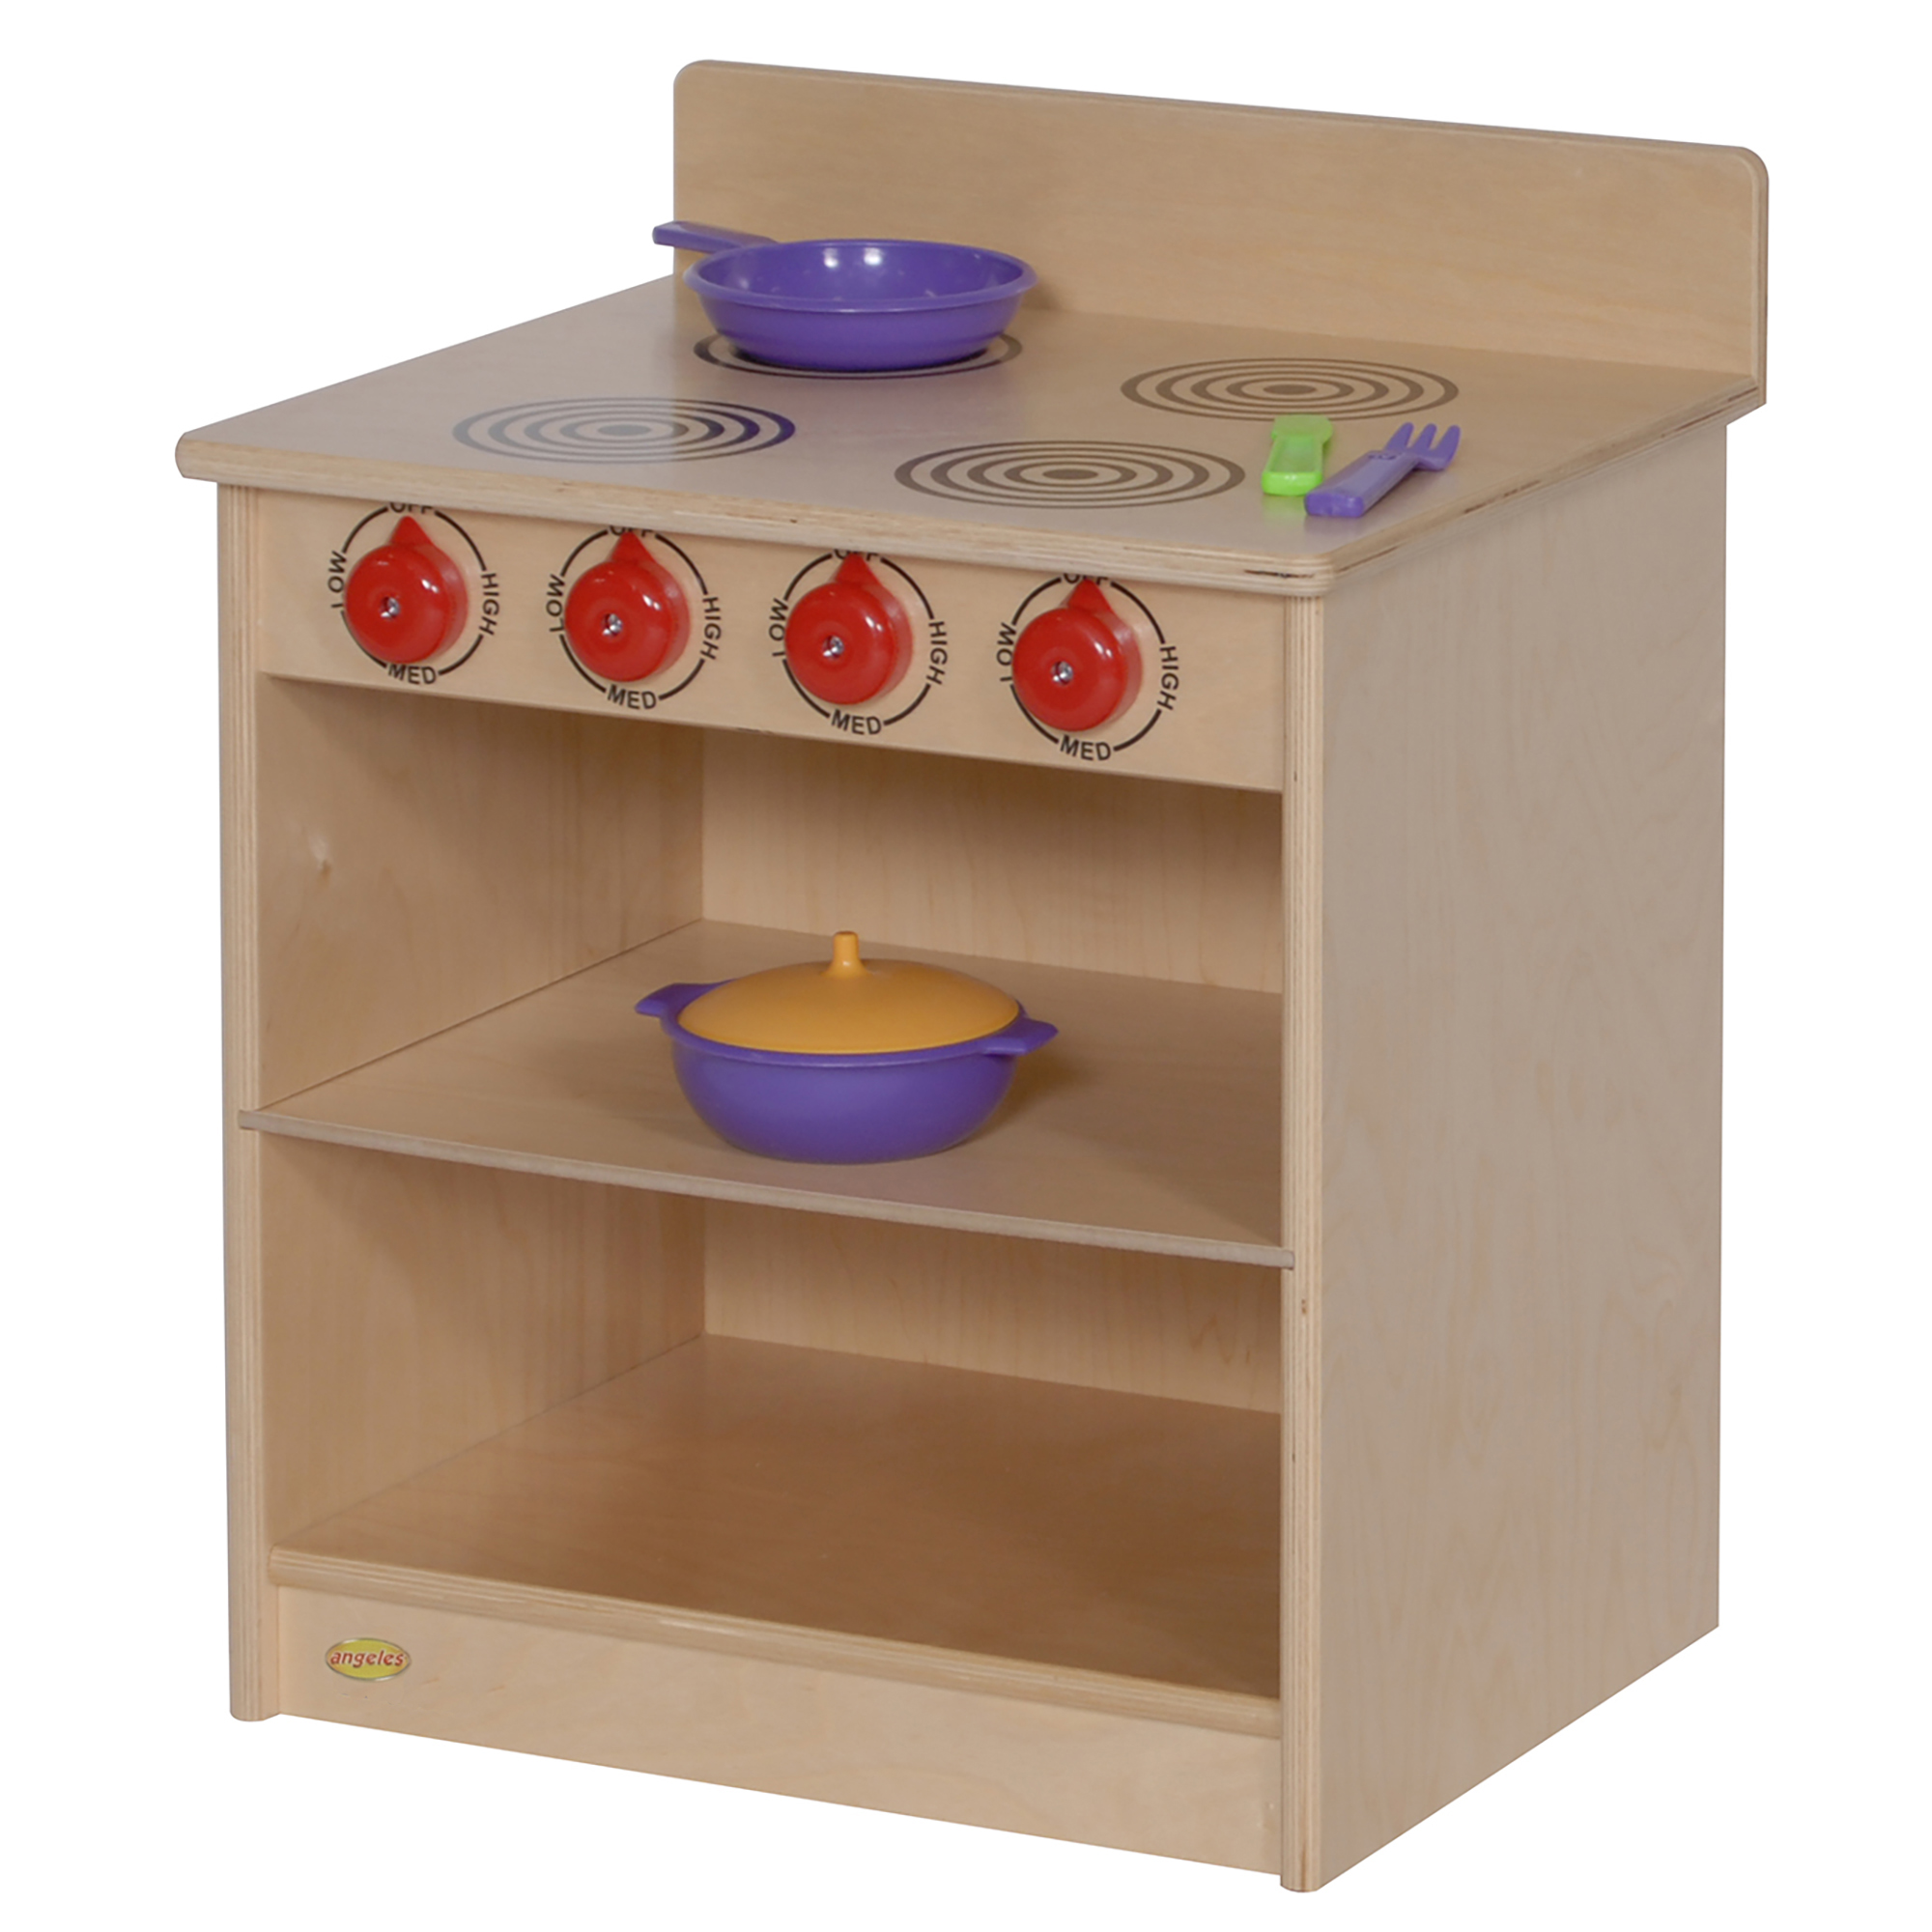 Toddler Stove